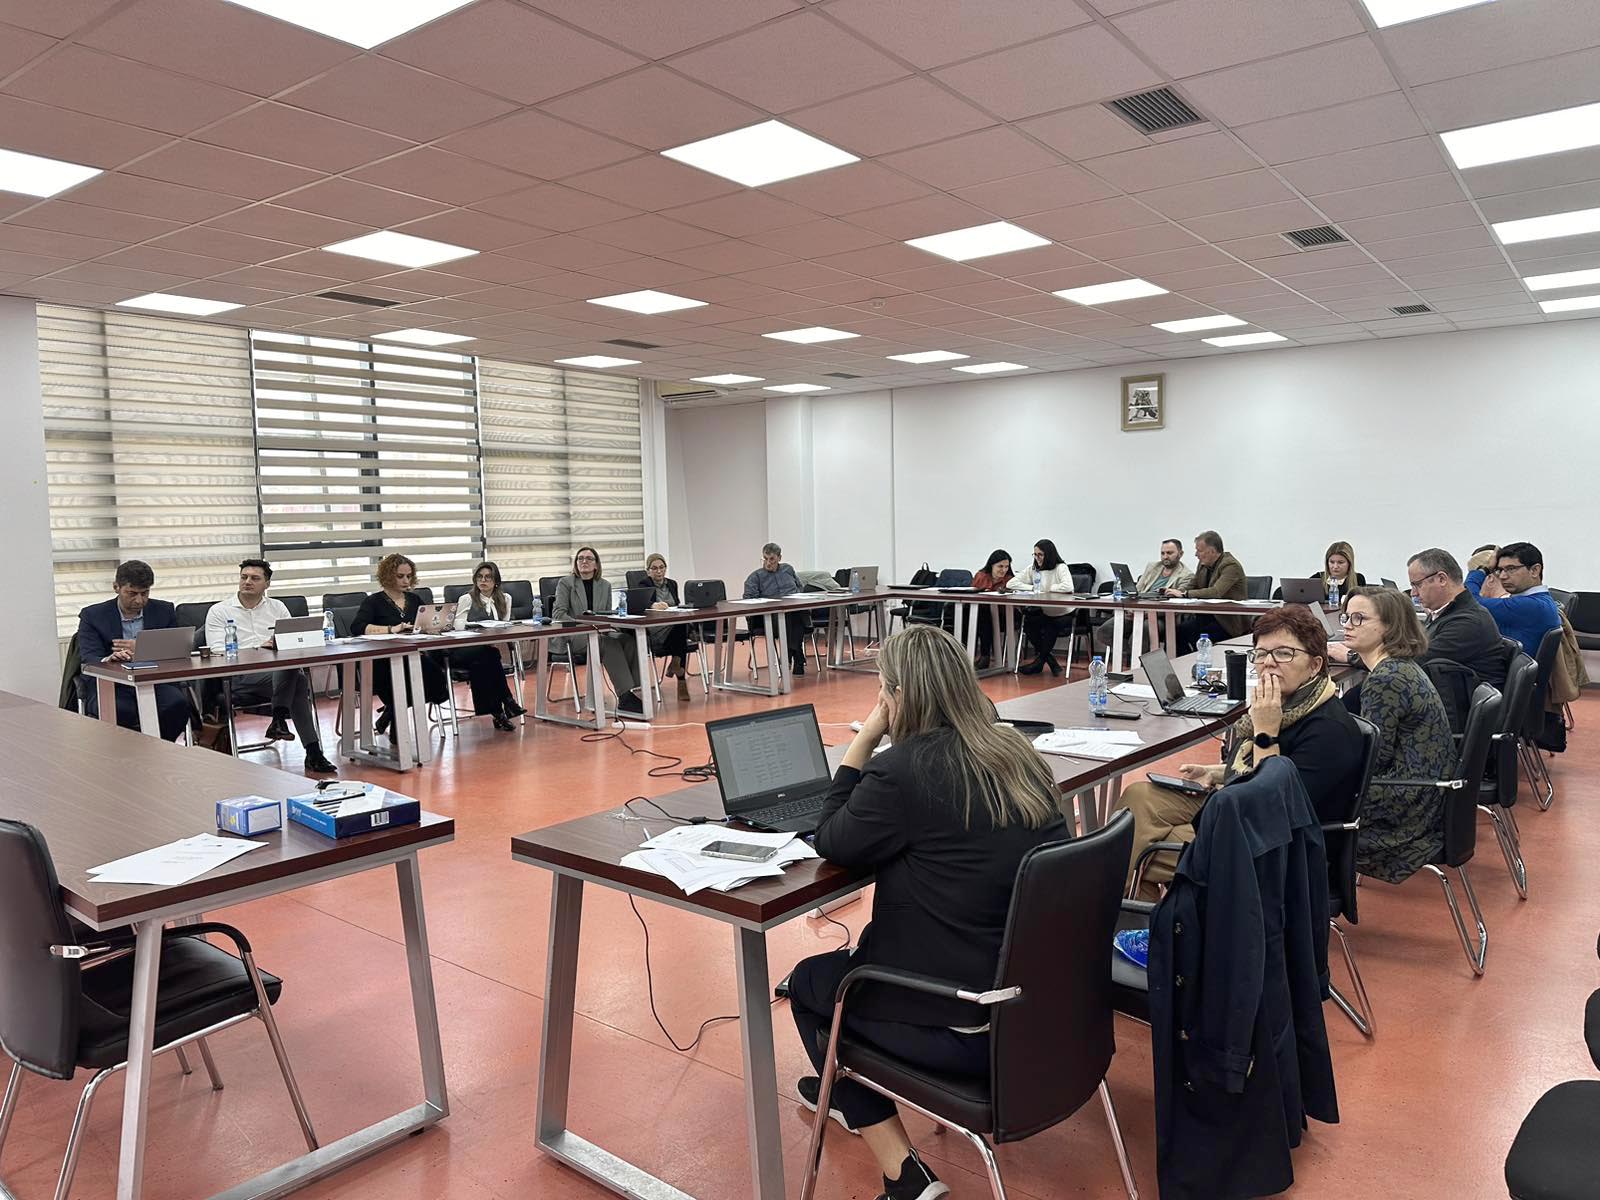 The Workshop for Designing the Education Technology Bachelor Program for the University of Prishtina, organized by the Faculty of Education from UP, is taking place at the University of Prishtina